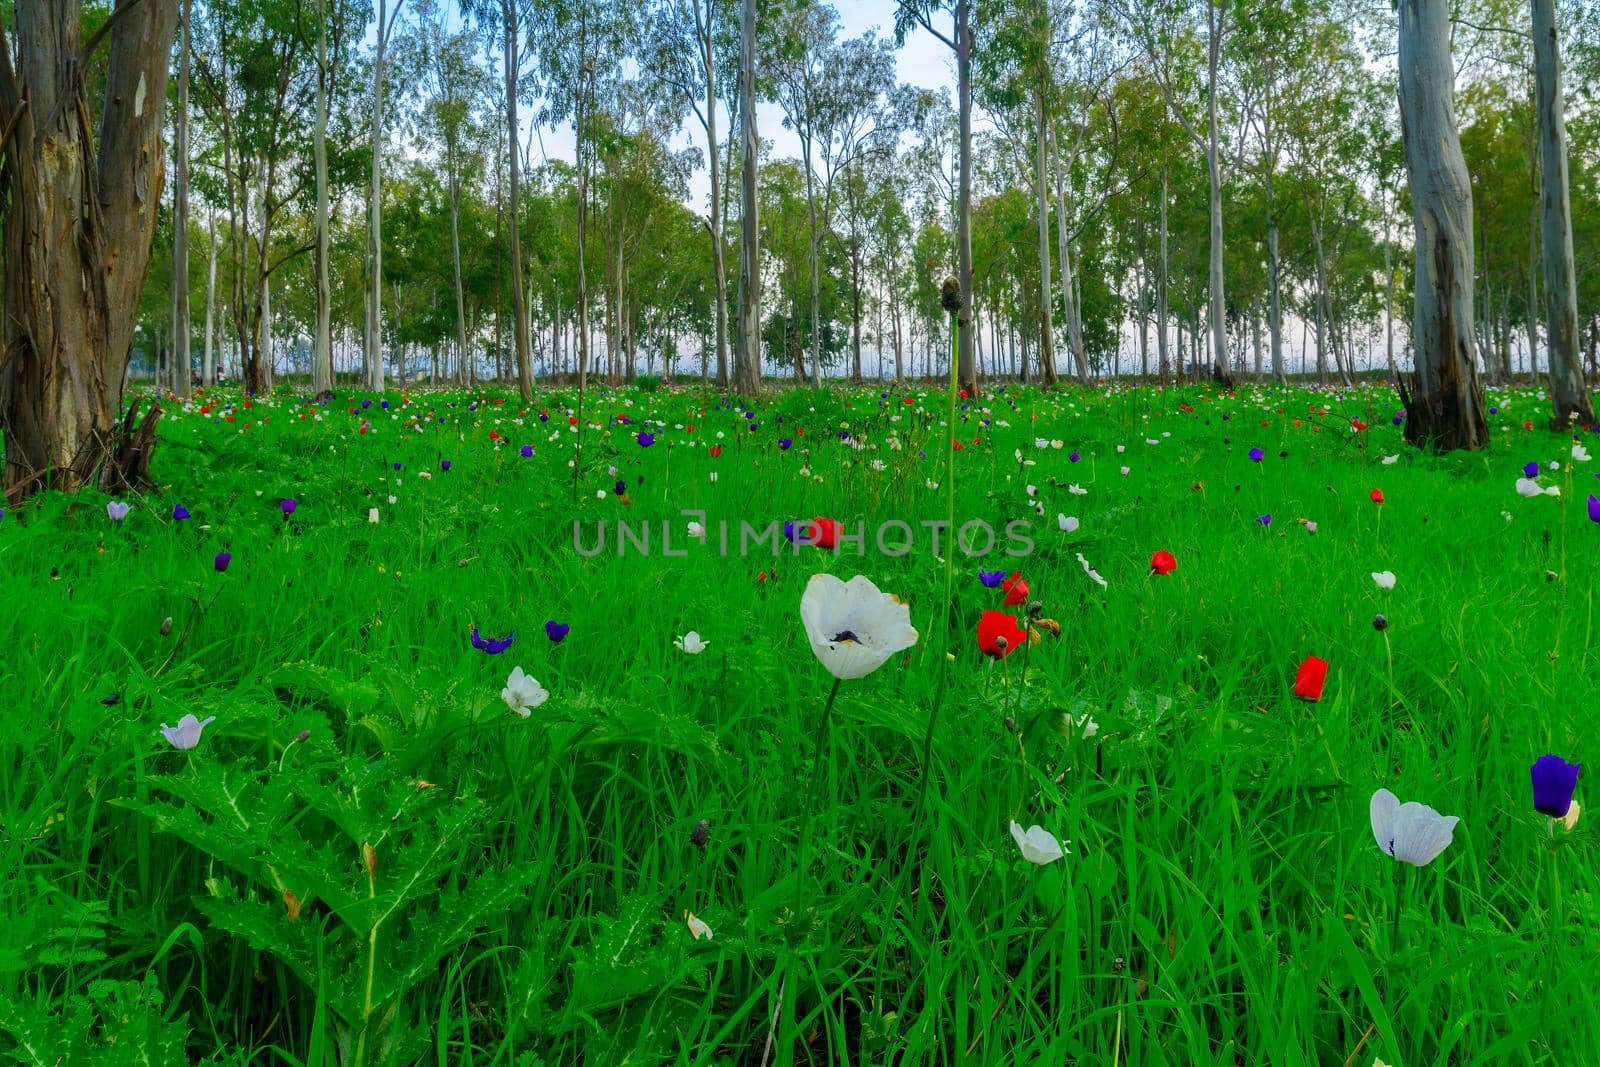 Colorful Anemone wildflowers in a Eucalyptus grove by RnDmS